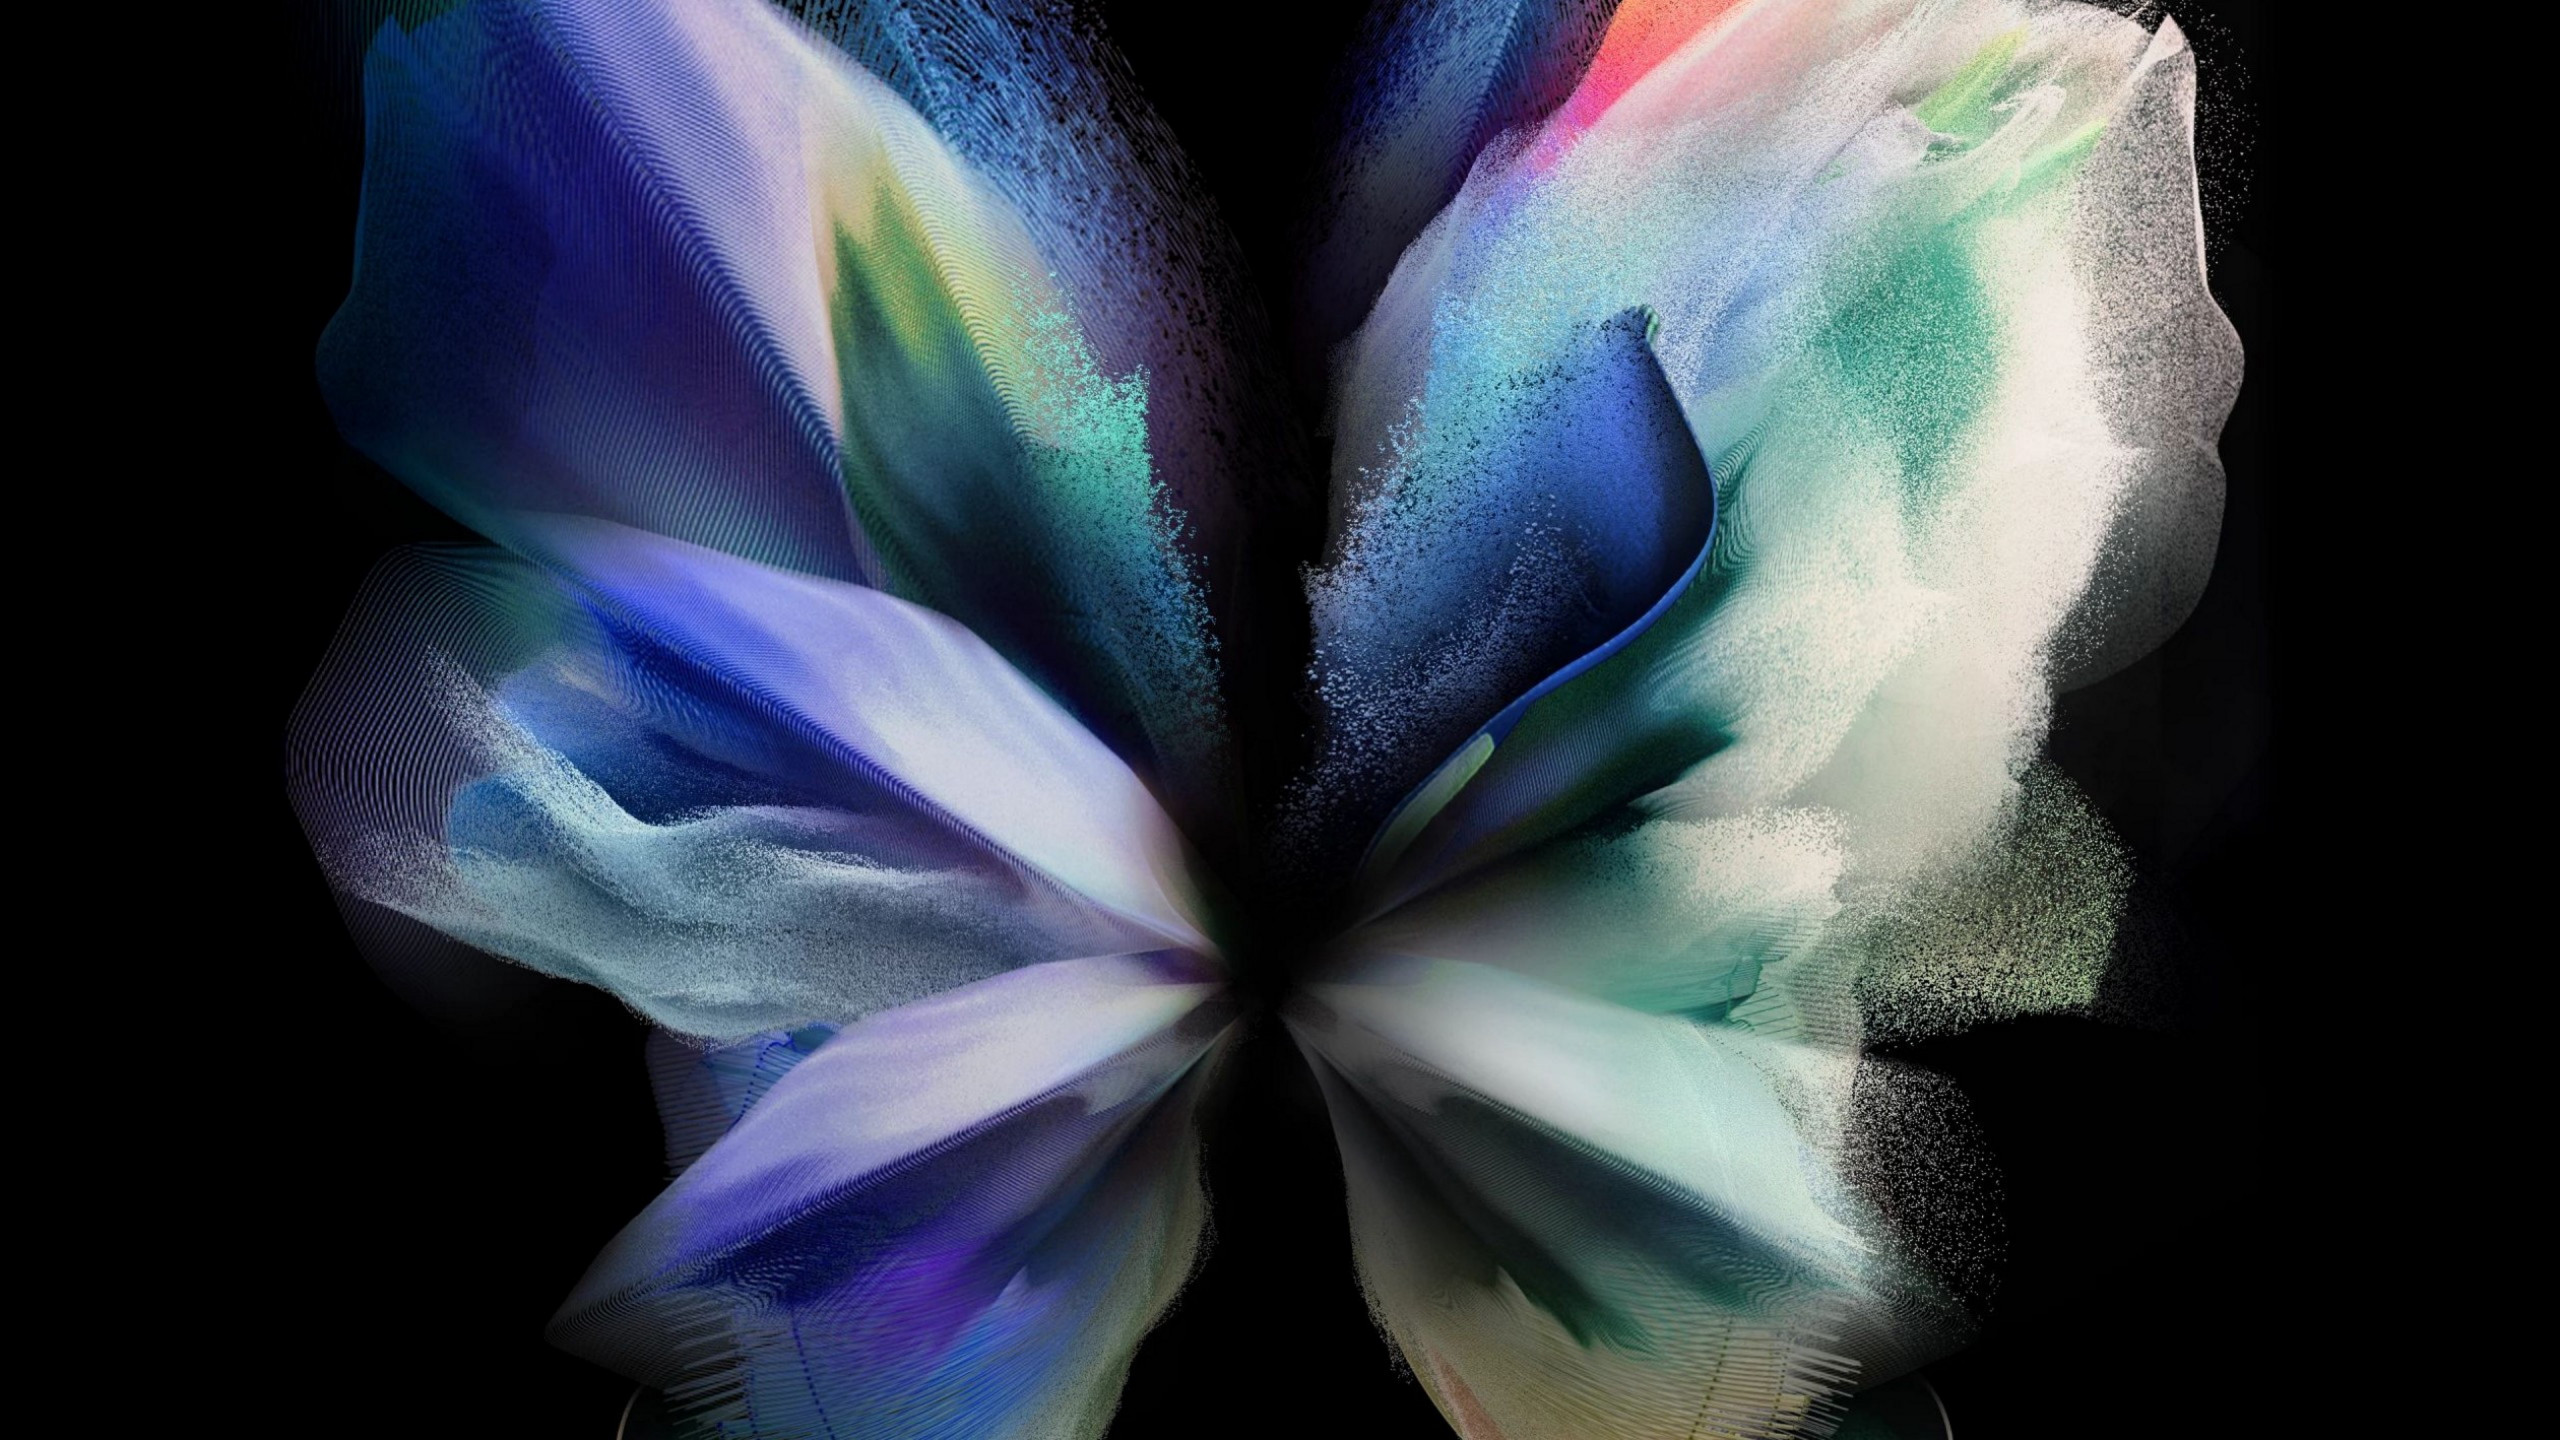 Download Wallpaper The Butterfly From Samsung Galaxy Z Fold 3 2560x1440